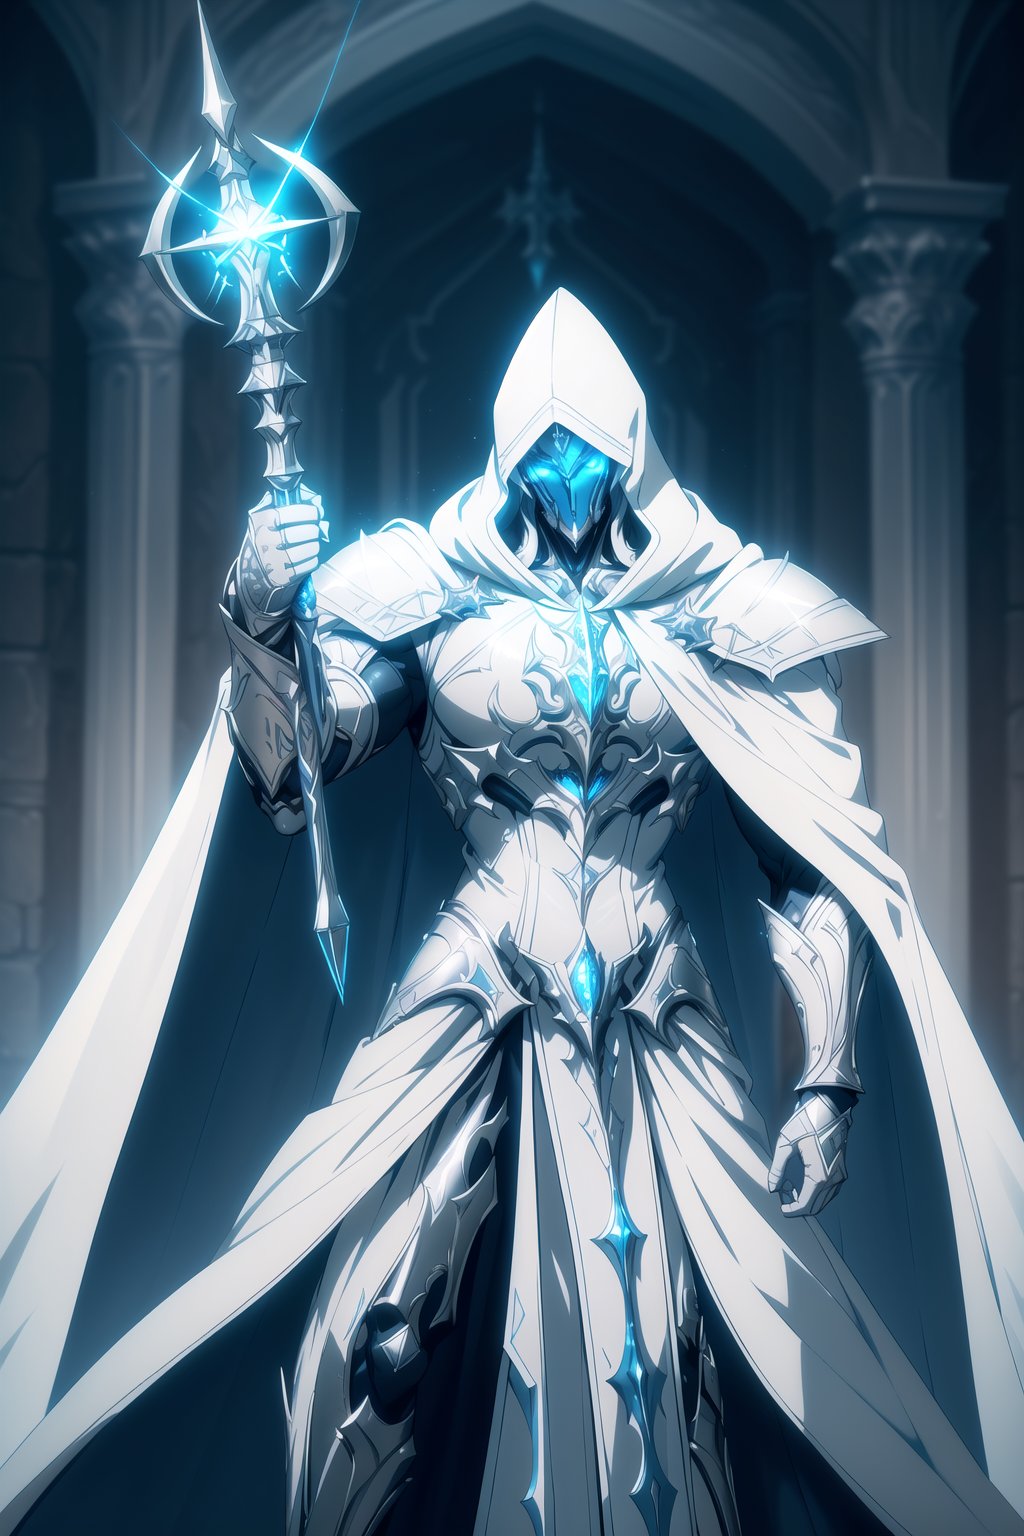 (Masterpiece, Best Quality), (Battle Priest in Warframe Style Armor), (Masculine Appearance:1.4), (Muscular Frame Build:1.2), (Glowing Blue Eyes), (Wearing White and Blue Templar-Themed Armored Robe, White Hood, and White Flowing Cloak:1.4), (Wielding a Silver Mace:1.4) (Cathedral Hall at Night:1.4), (Action Pose:1.4), Centered, (Half Body Shot:1.4), (From Front Shot:1.2), Insane Details, Intricate Face Detail, Intricate Hand Details, Cinematic Shot and Lighting, Realistic and Vibrant Colors, Sharp Focus, Ultra Detailed, Realistic Images, Depth of Field, Incredibly Realistic Environment and Scene, Master Composition and Cinematography, castlevania style,castlevania style,WARFRAME